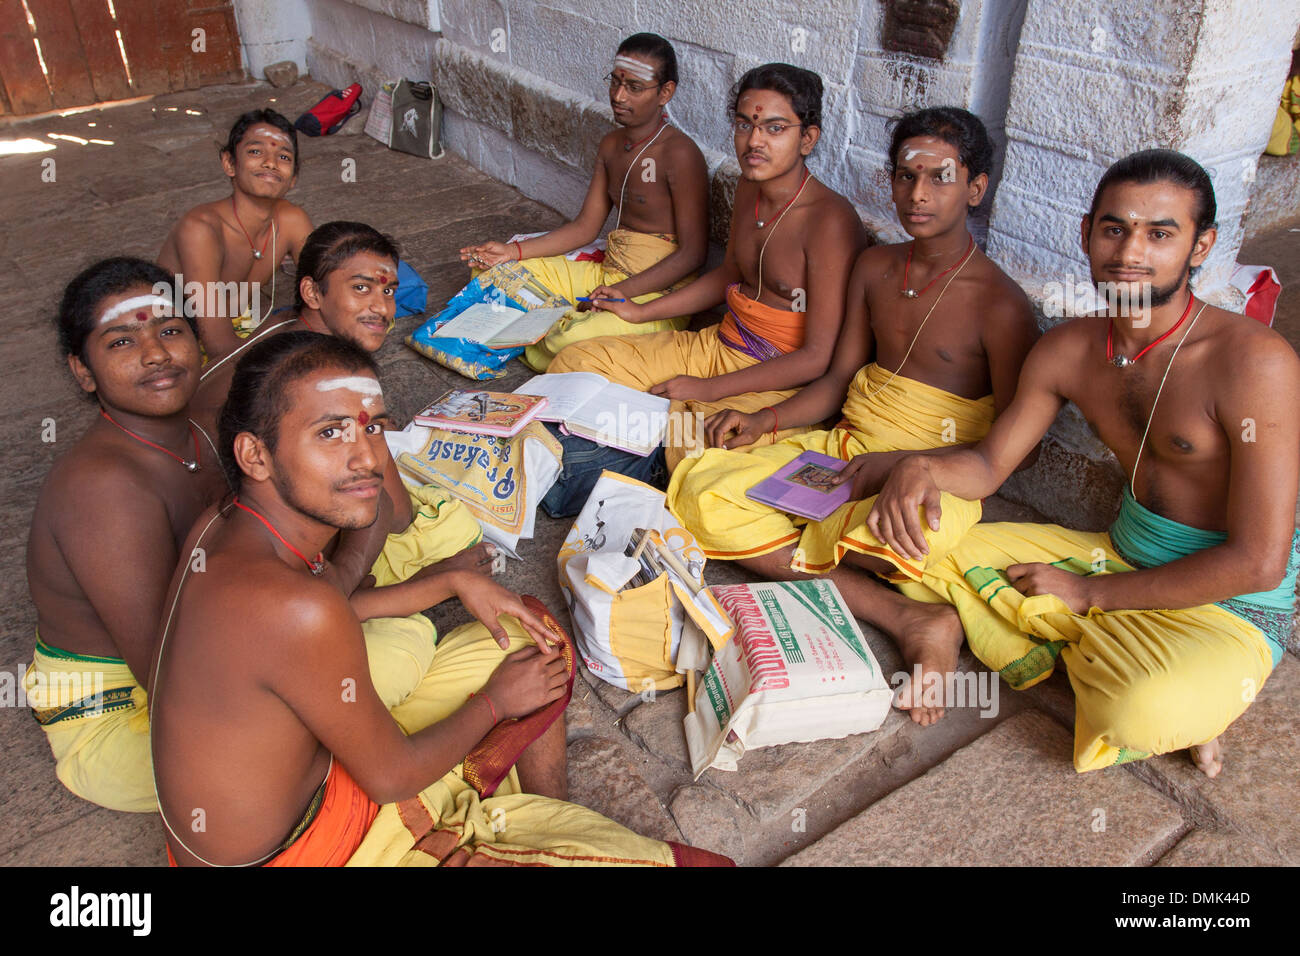 YOUNG TAMIL MEN STUDYING IN A SCHOOL FOR BRAHMANS IN A TEMPLE, MADURAI, STATE OF TAMIL NADU, IINDIA Stock Photo